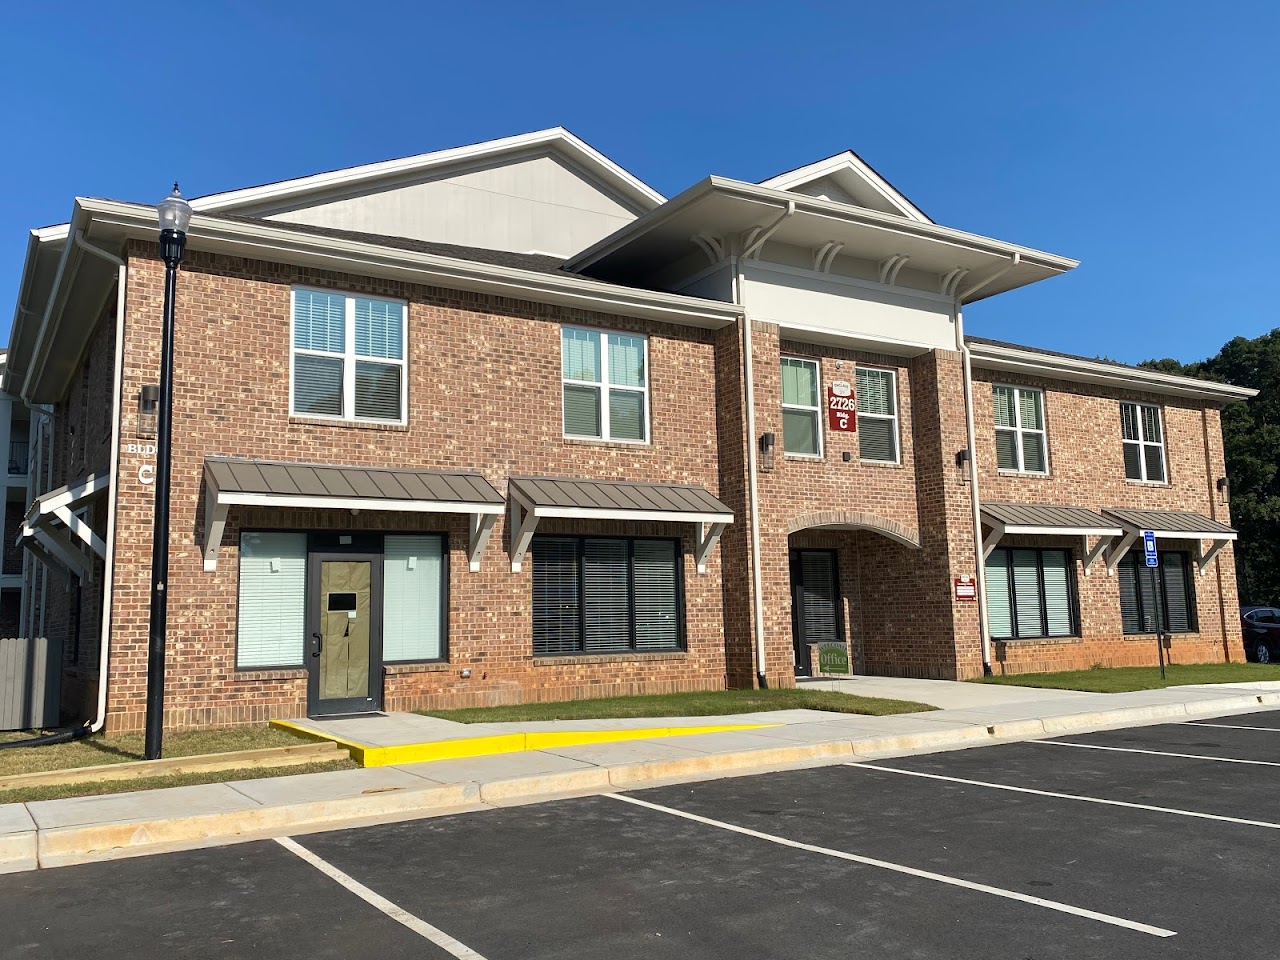 Photo of ENCLAVE AT DEPOT PARK. Affordable housing located at 2726 SOUTH MAIN STREET NORTHWEST KENNESAW, GA 30144